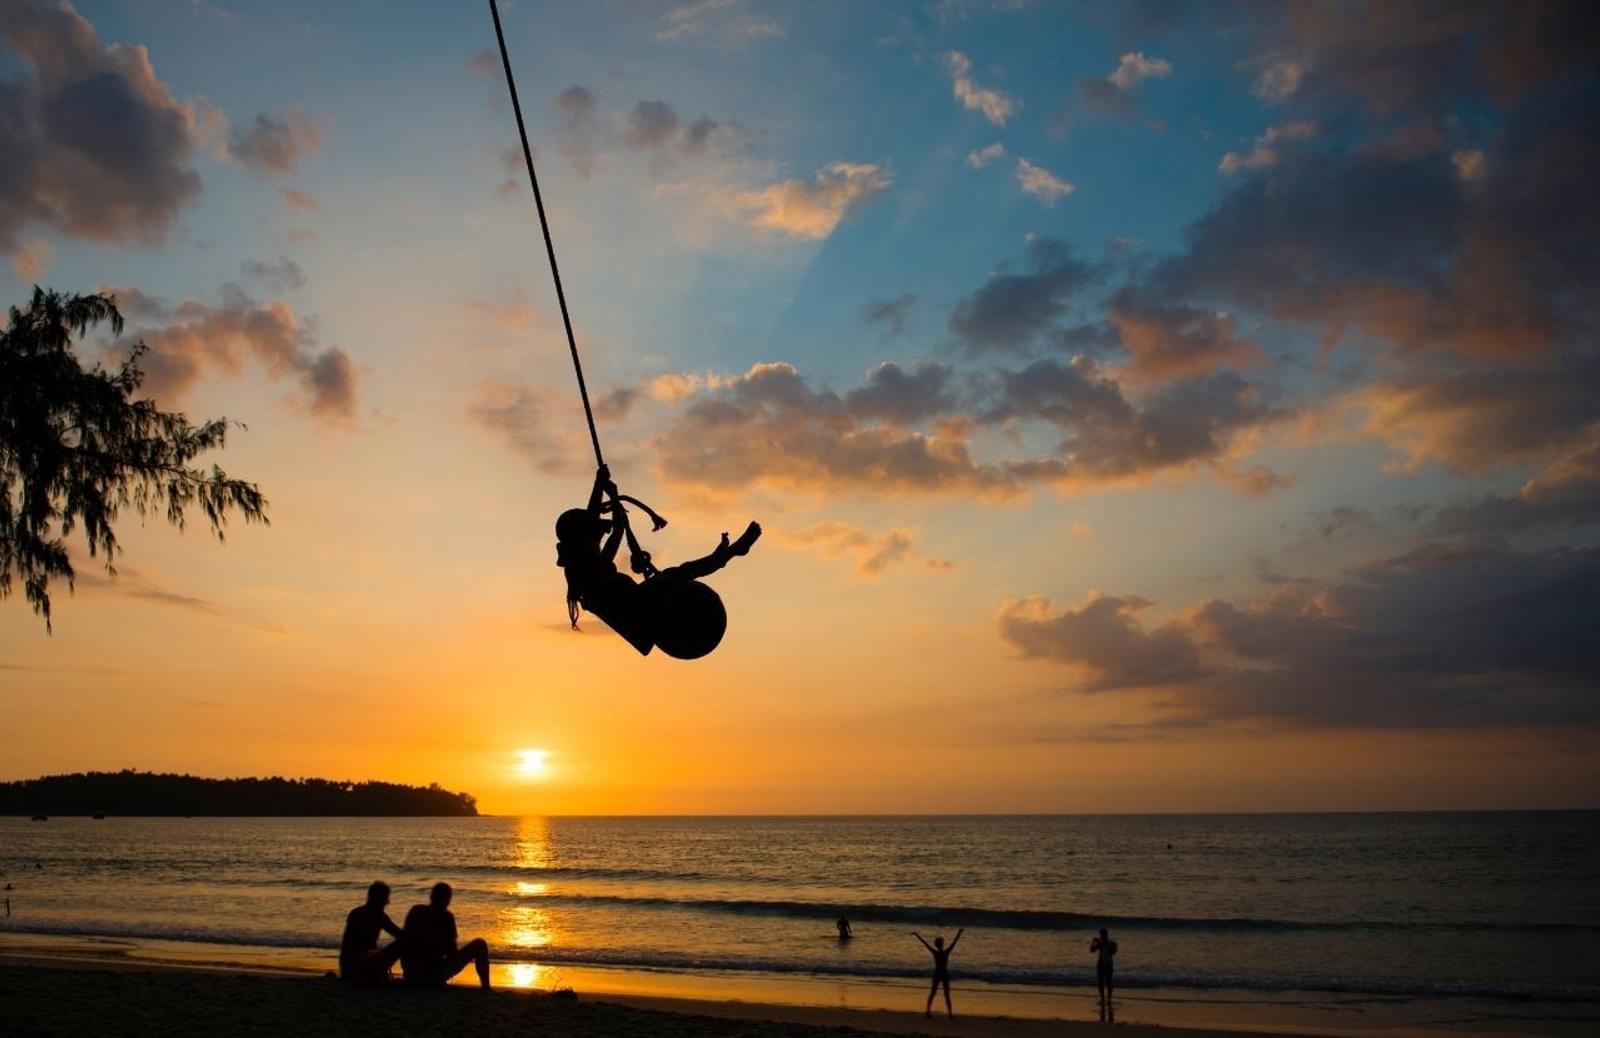 A summer sun sets over a body of water. Silhouettes of a family, lounging, playing and swinging on a rope are on the shoreline.